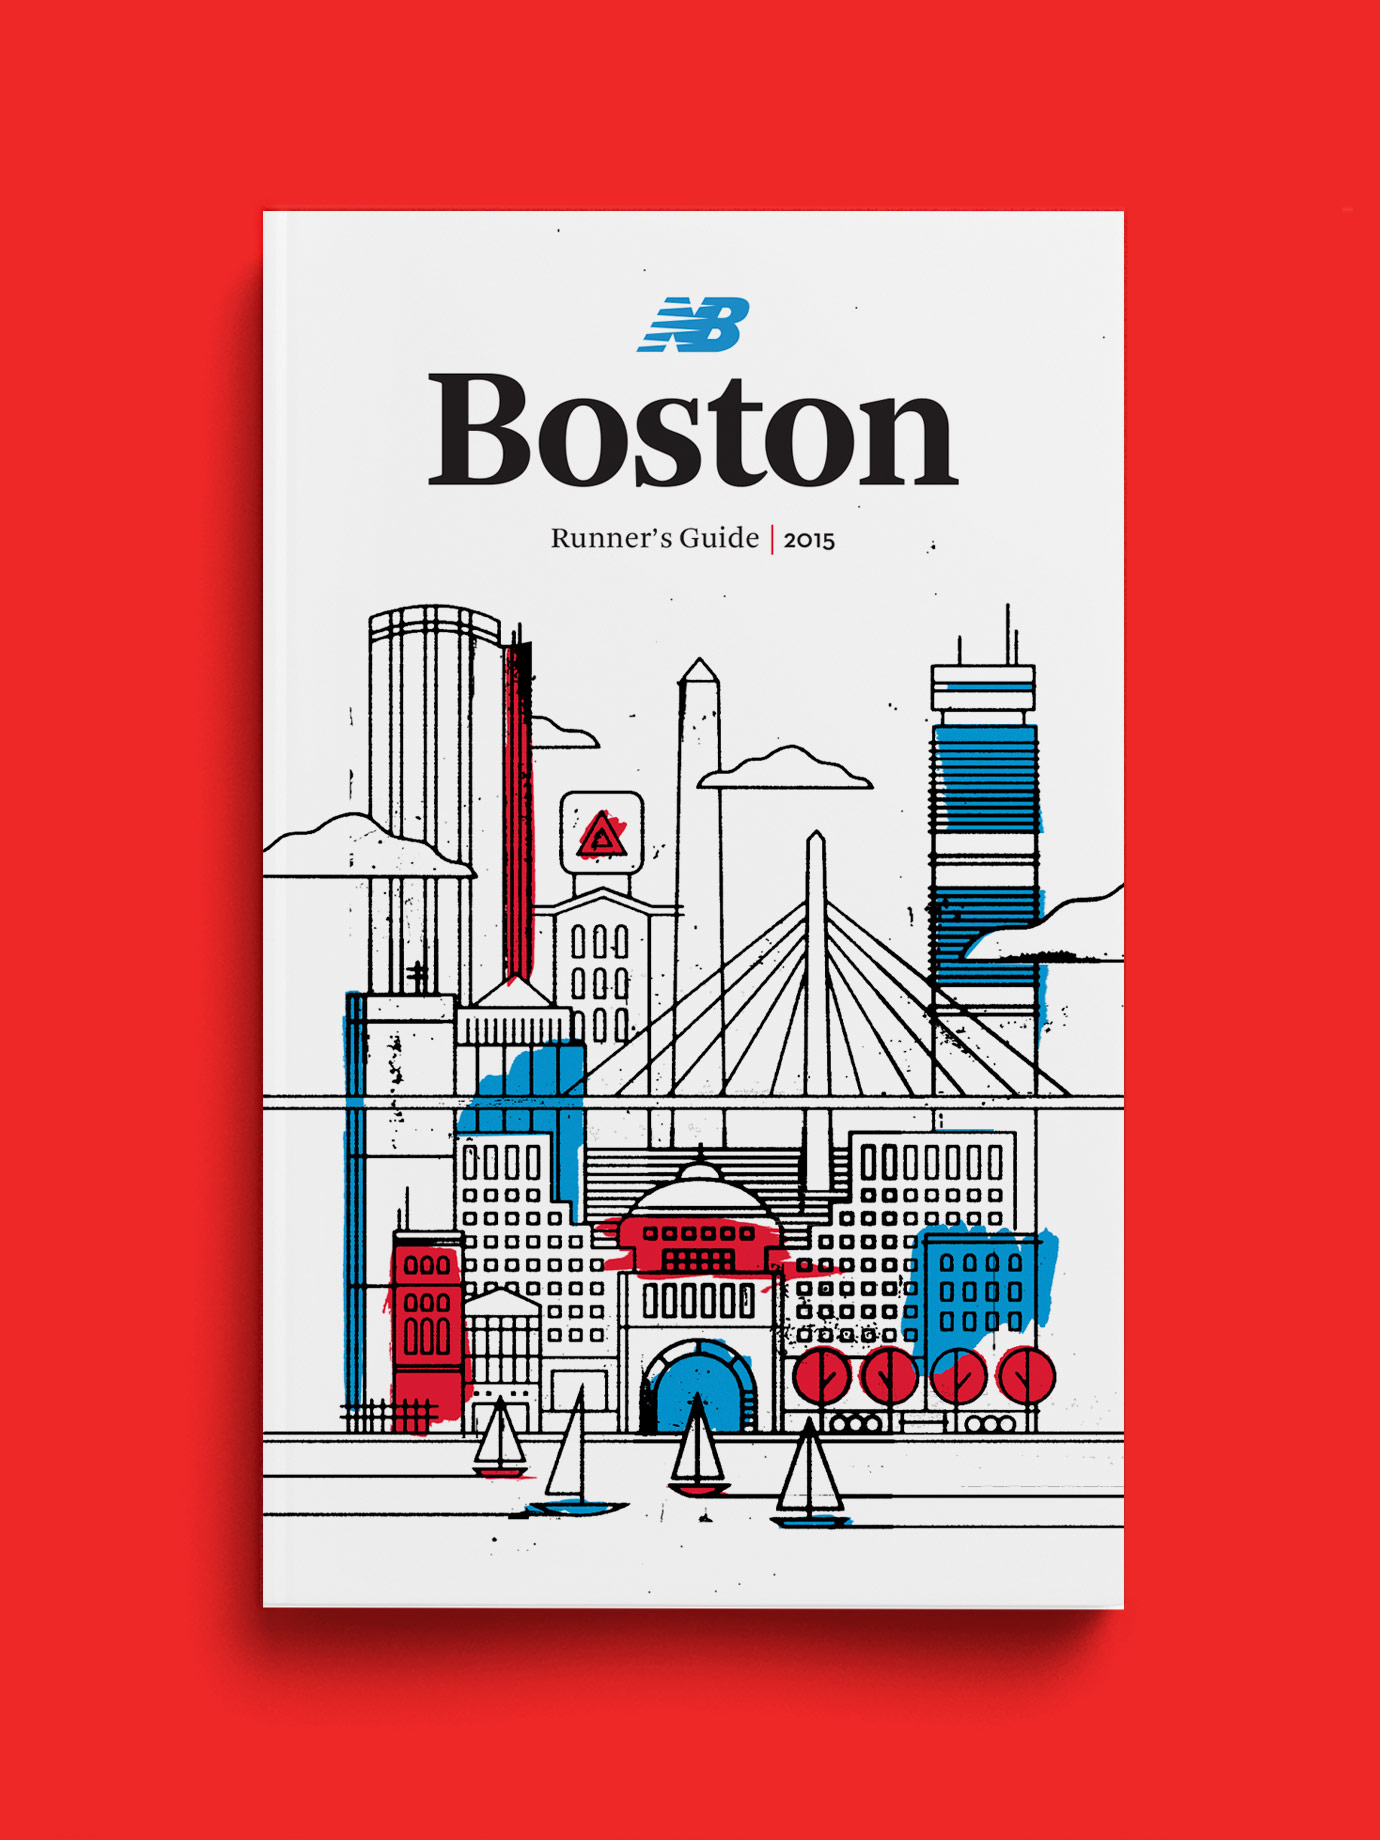 Runnners’ guidebook of Boston for New Balance